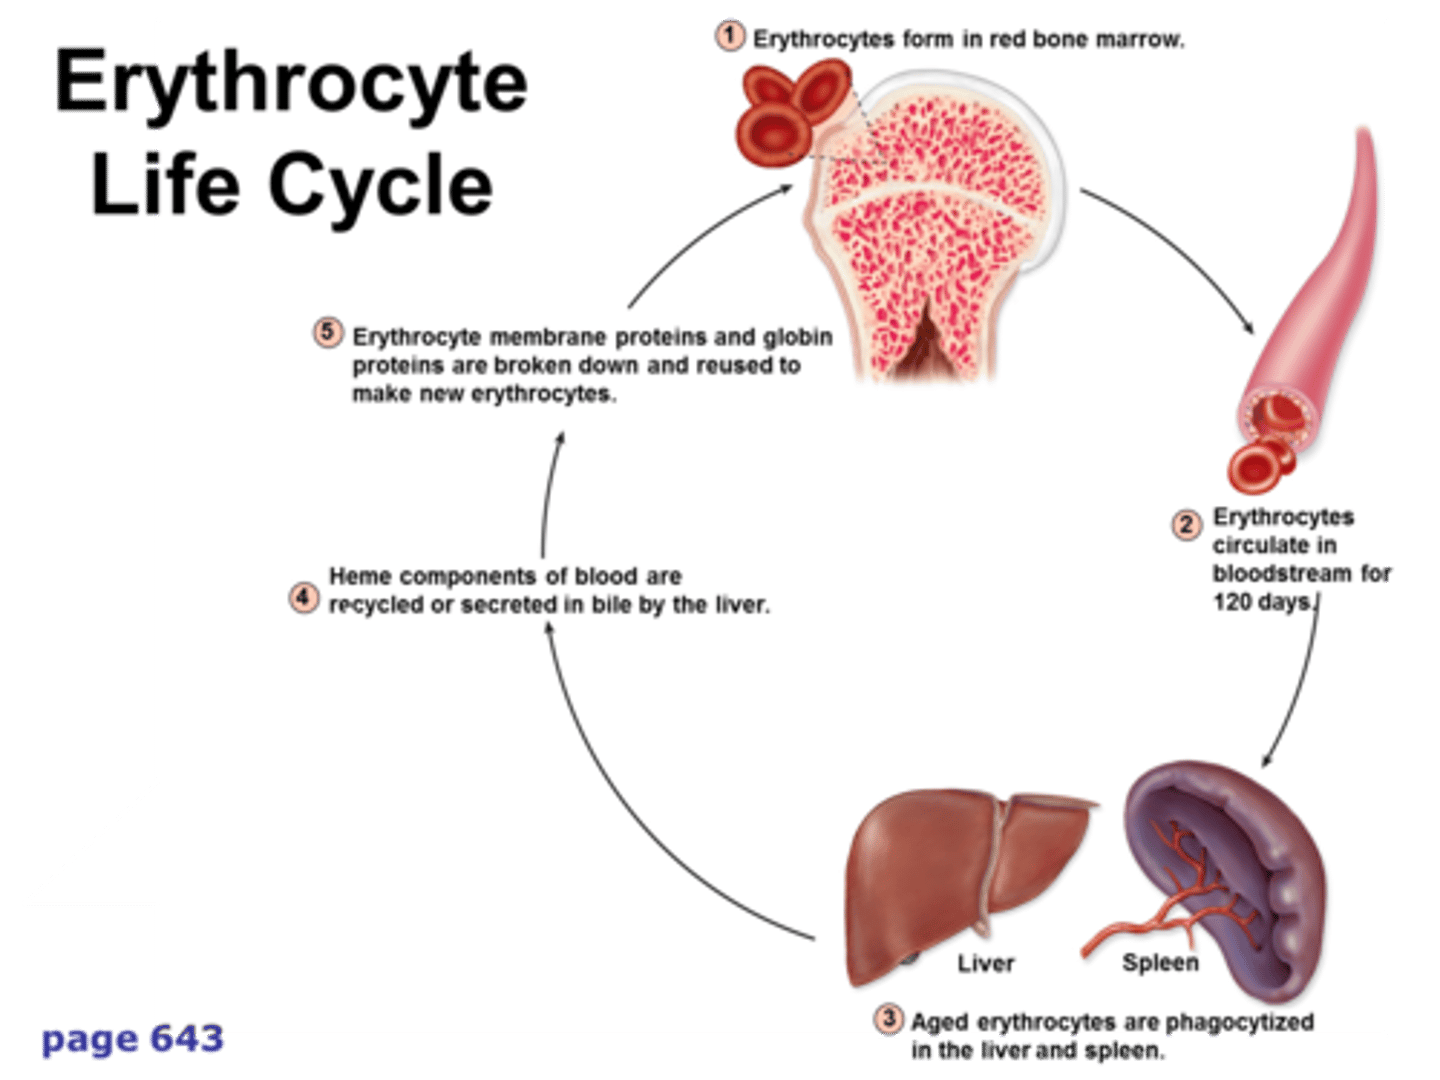 <p>Nutrients are absorbed in small intestine</p><p>Blood transports nutrients to red bone marrow</p><p>RBM erythrocytes arise from hemocytoblasts.</p><p>Erythrocytes life span = 120 days</p><p>Macrophage destroys old erythrocytes</p>